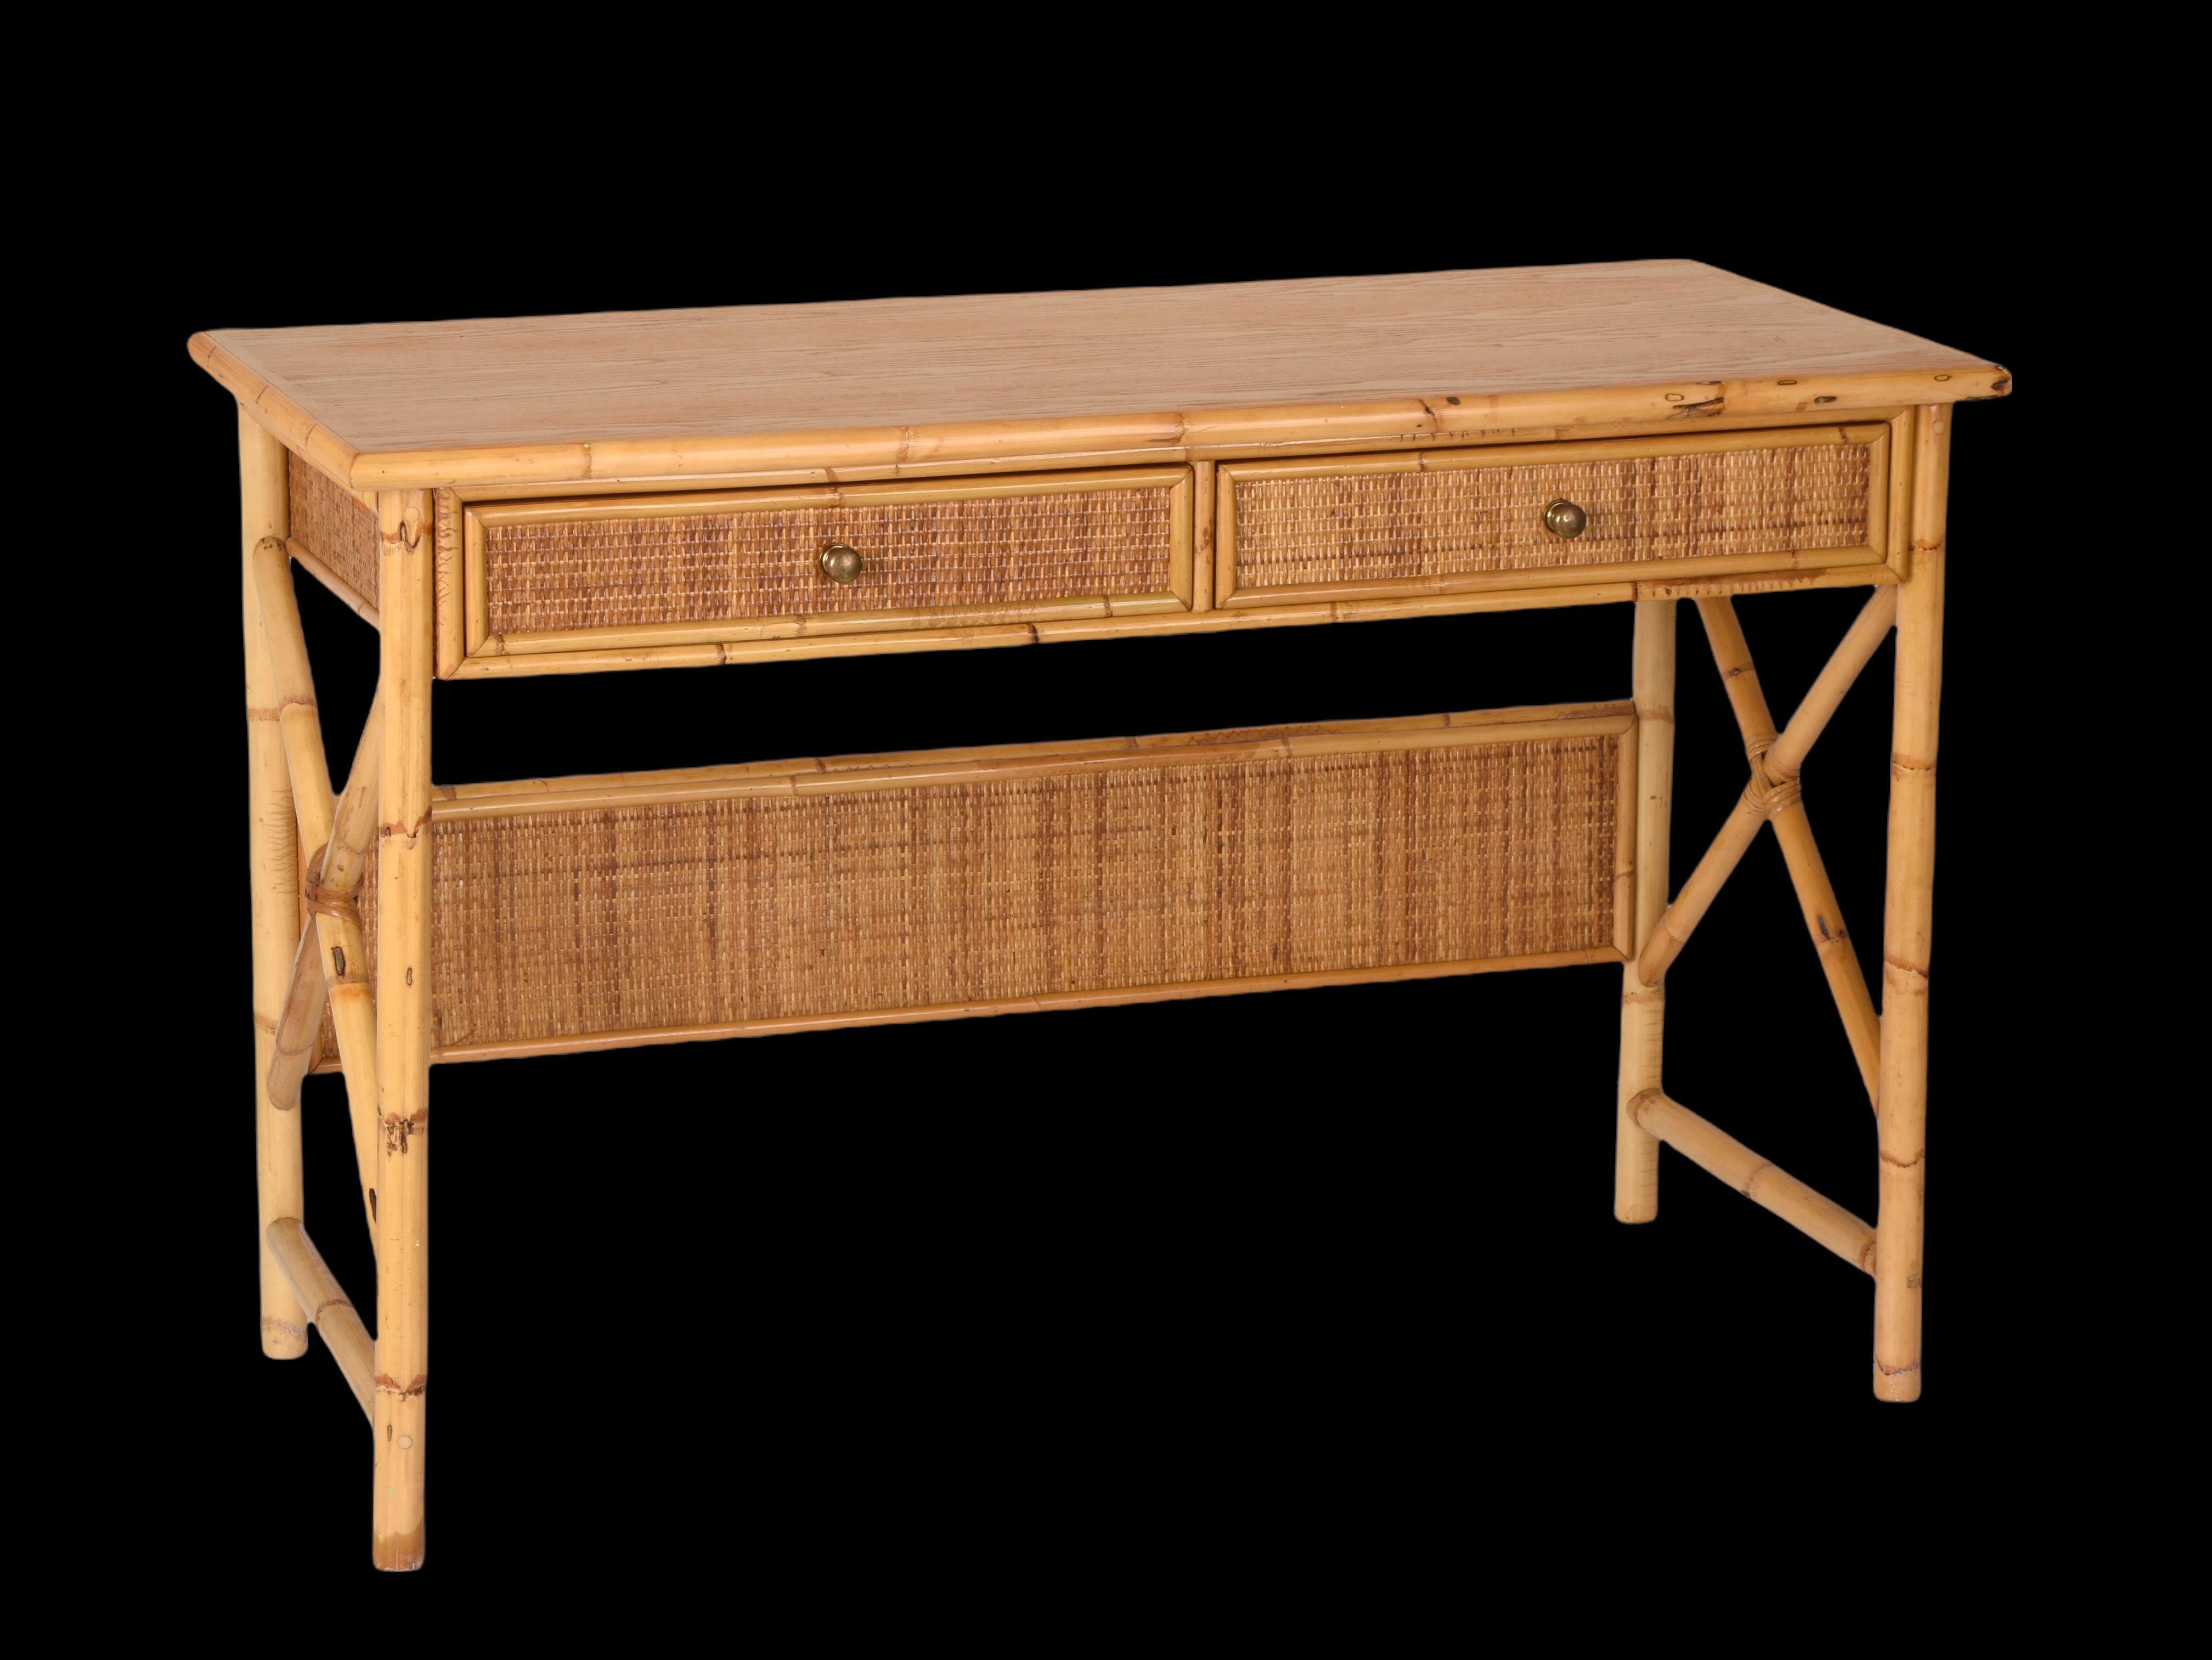 Midcentury Bamboo Cane, Ash Wood and Rattan Italian Desk with Drawers, 1980s 1